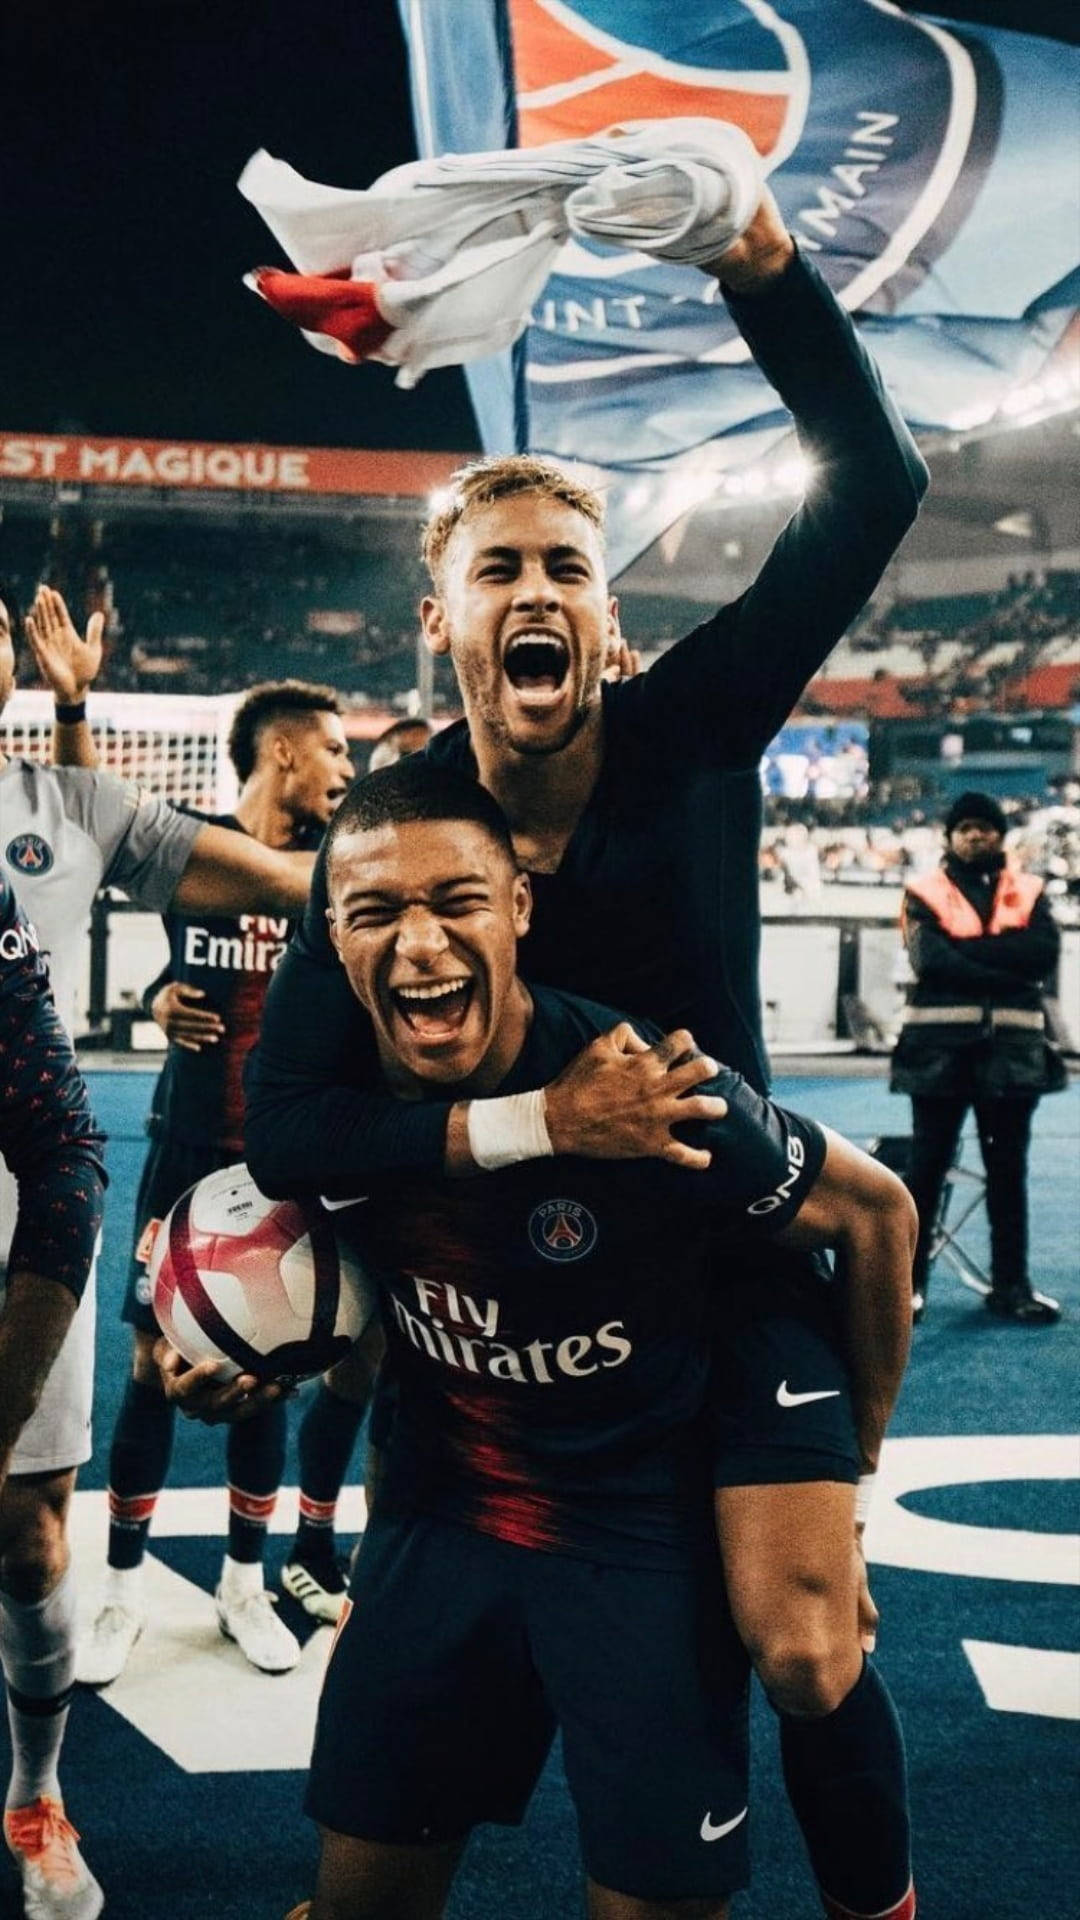 Neymaroch Mbappe Piggy Back. (this Can Be Used As A Caption For A Computer Or Mobile Wallpaper Featuring Neymar And Mbappe Piggy Backing Each Other.) Wallpaper